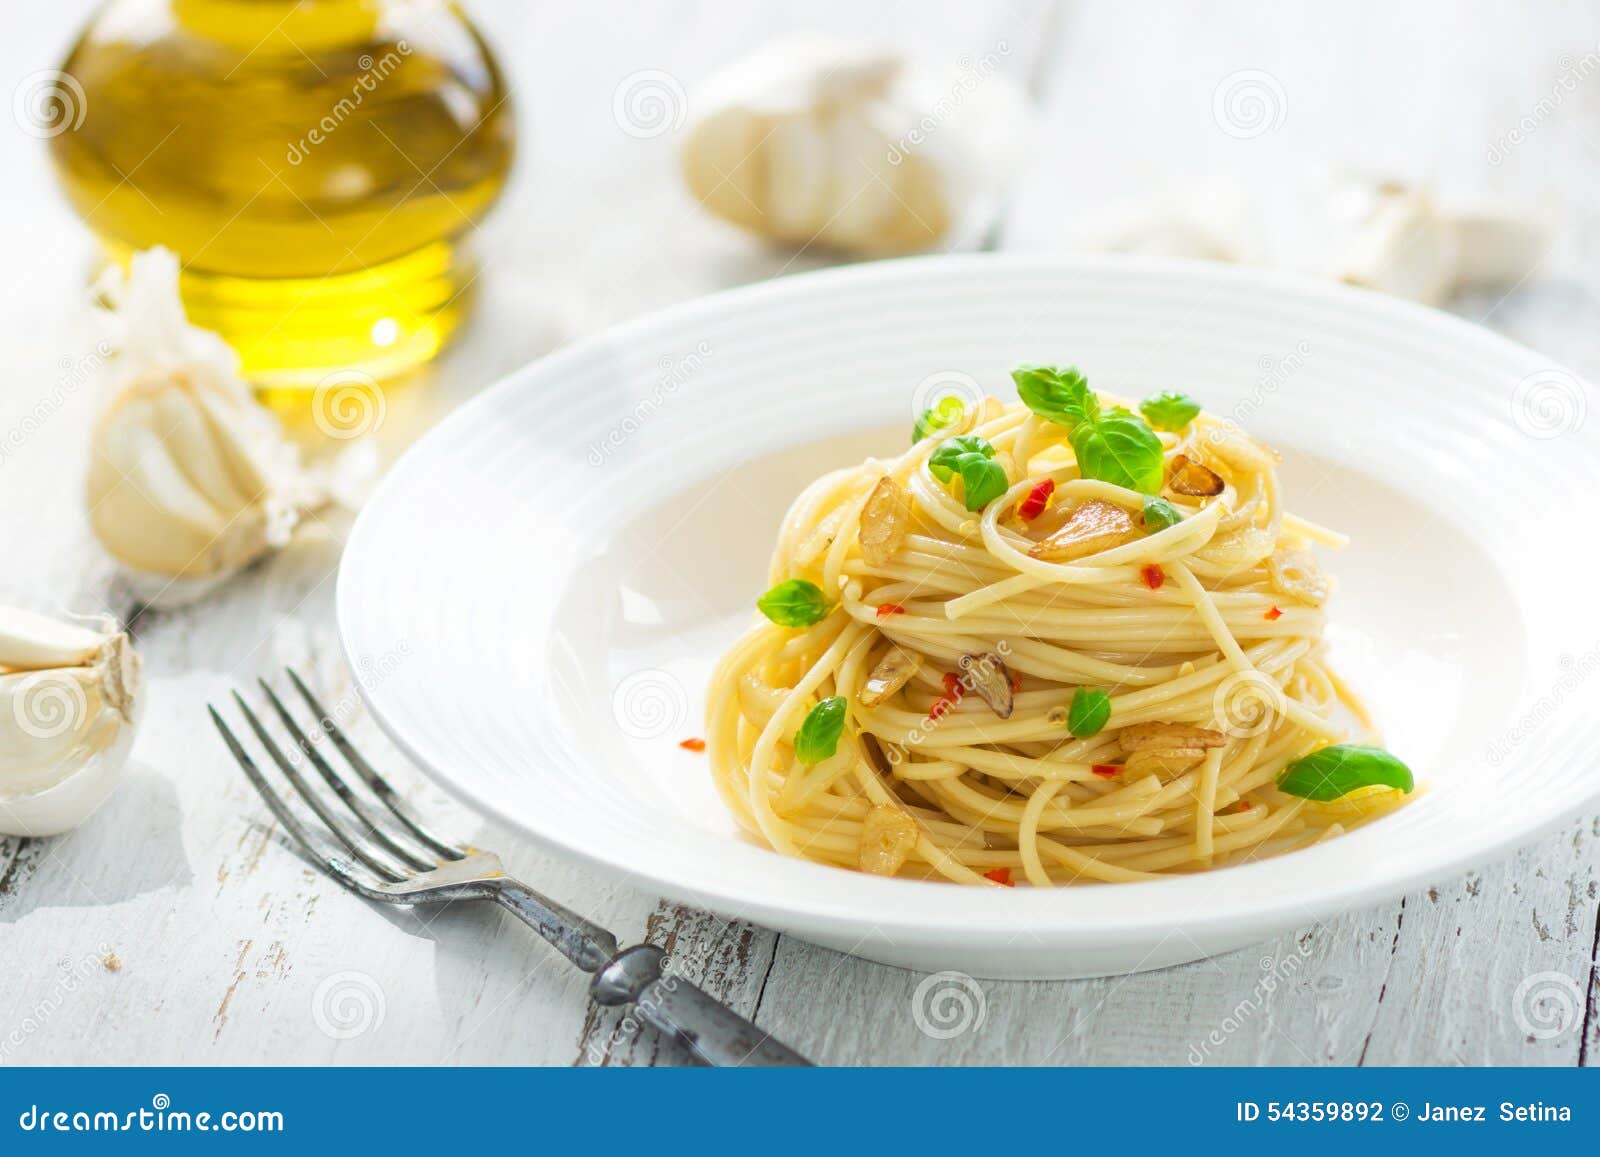 spageti olive oil and peperoncino